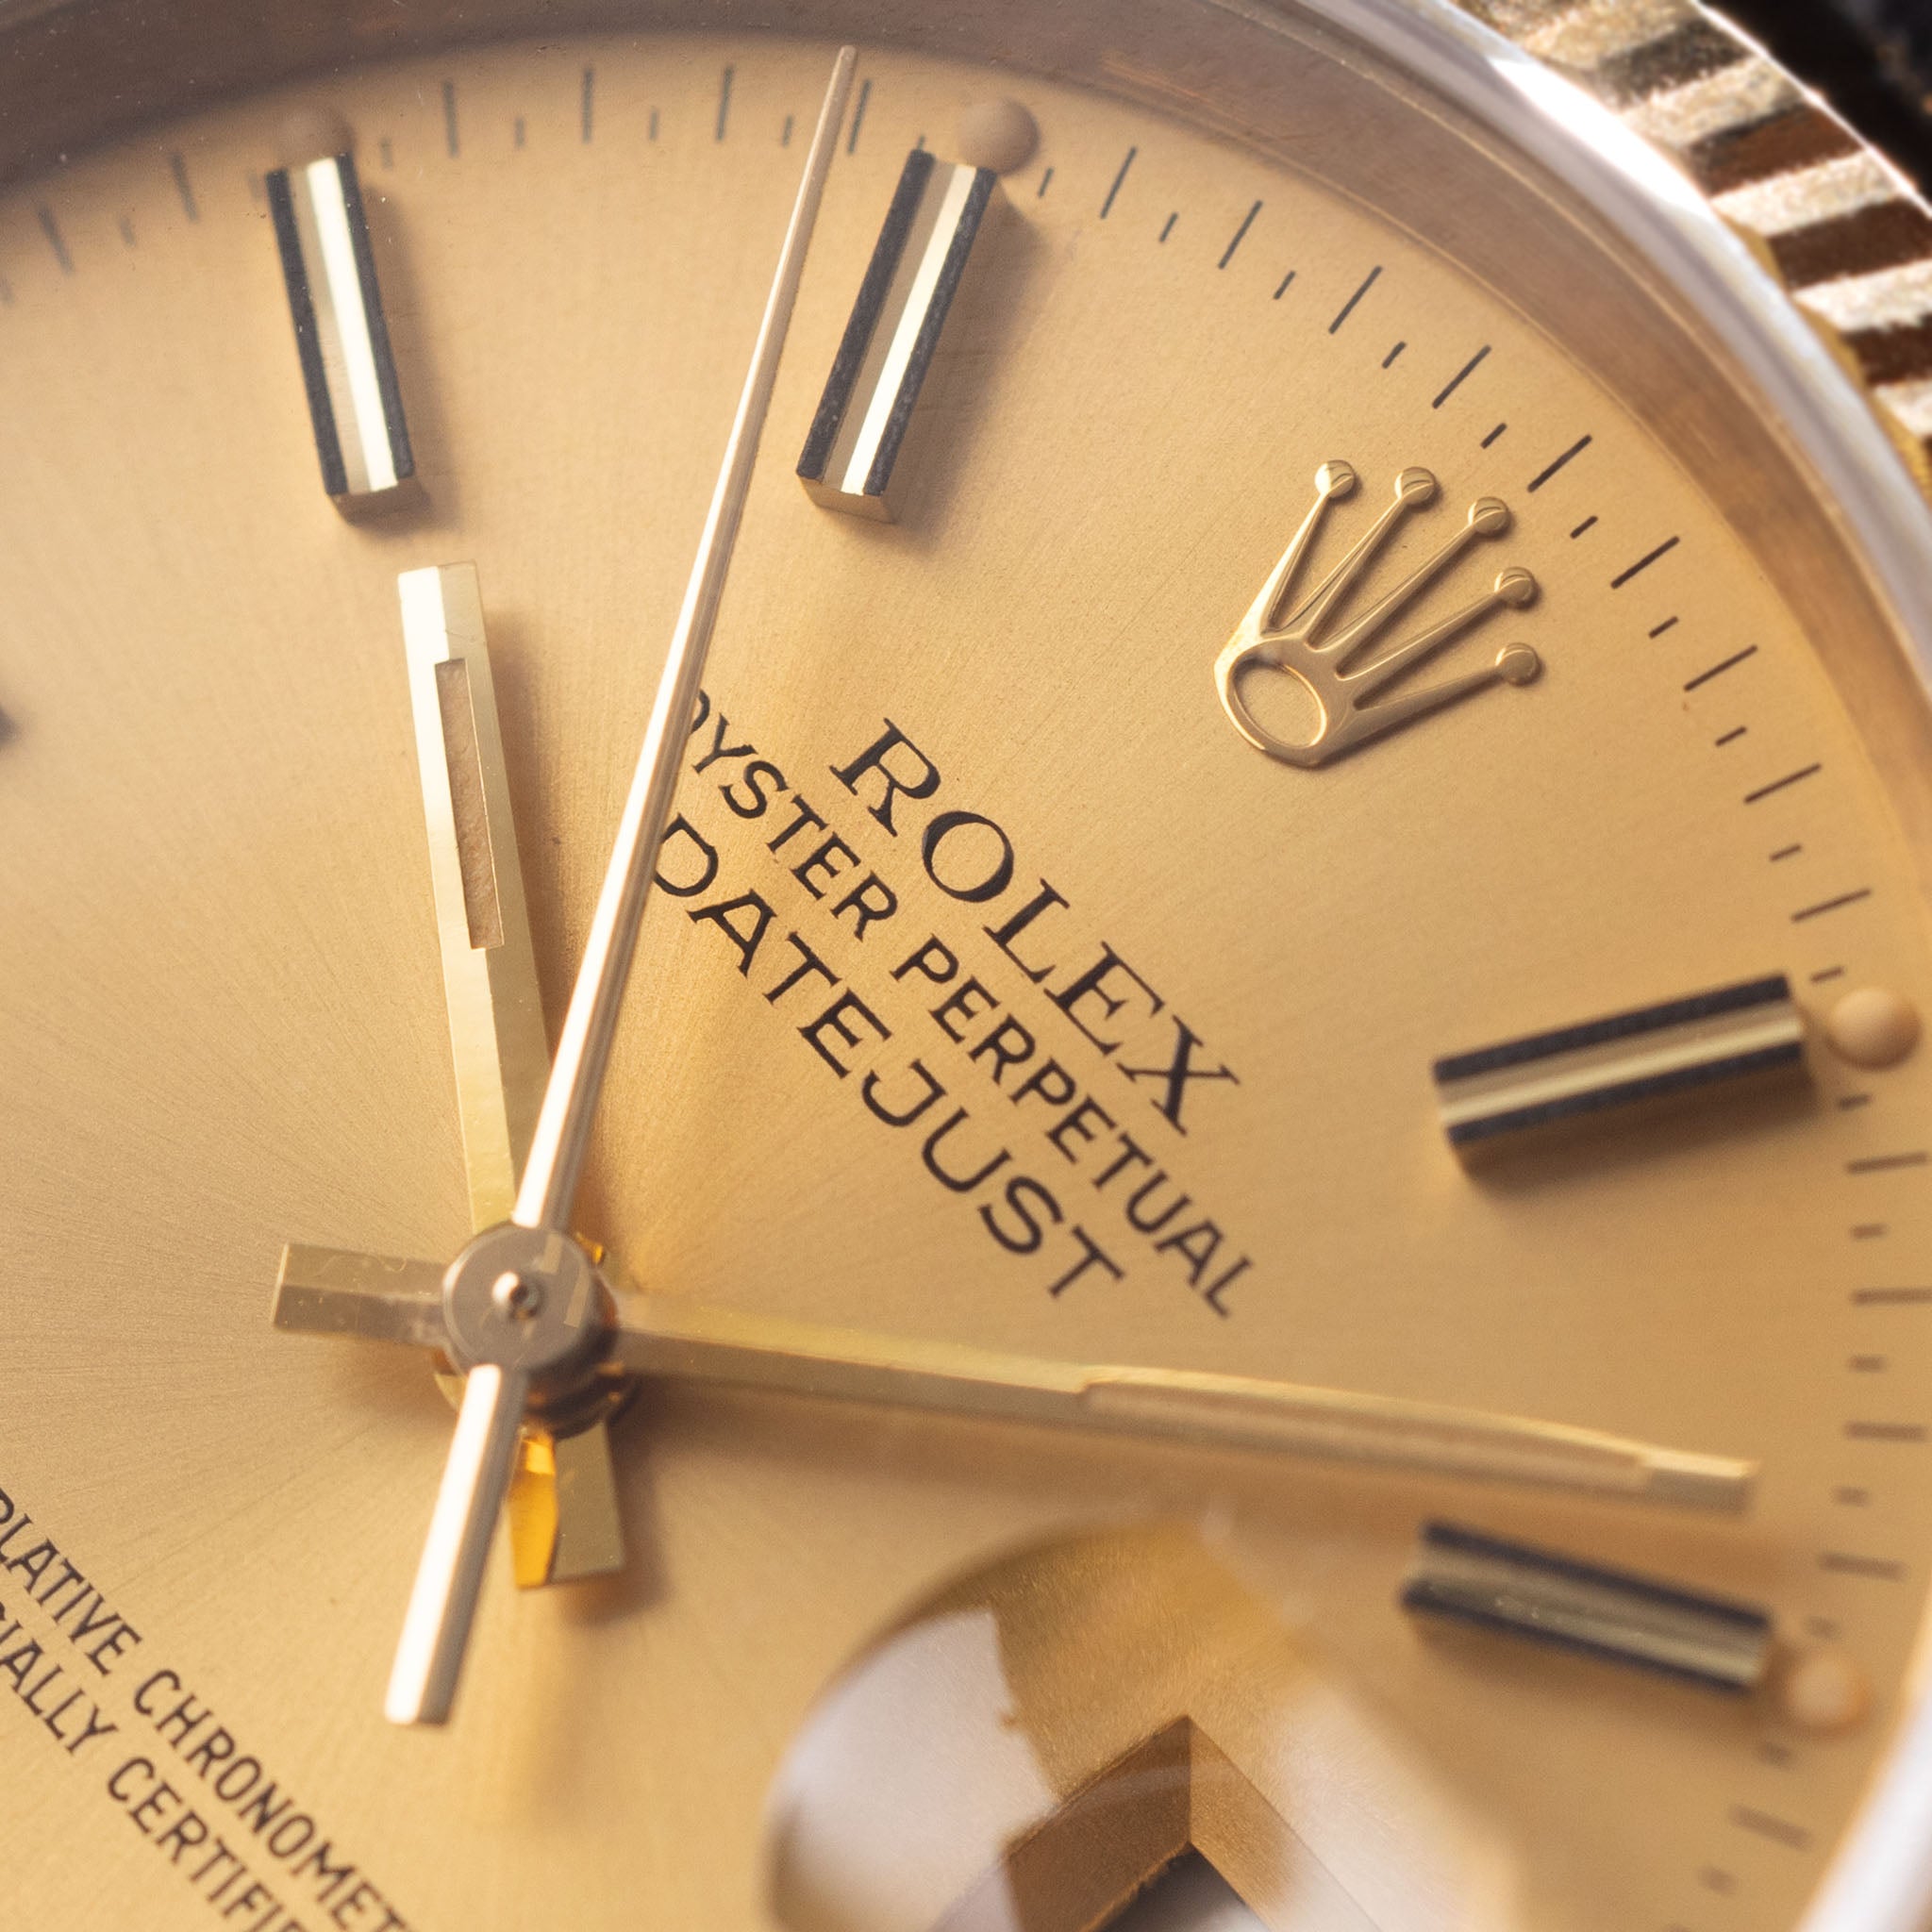 Rolex Datejust Yellow Gold Champagne Dial With Papers Ref 16018